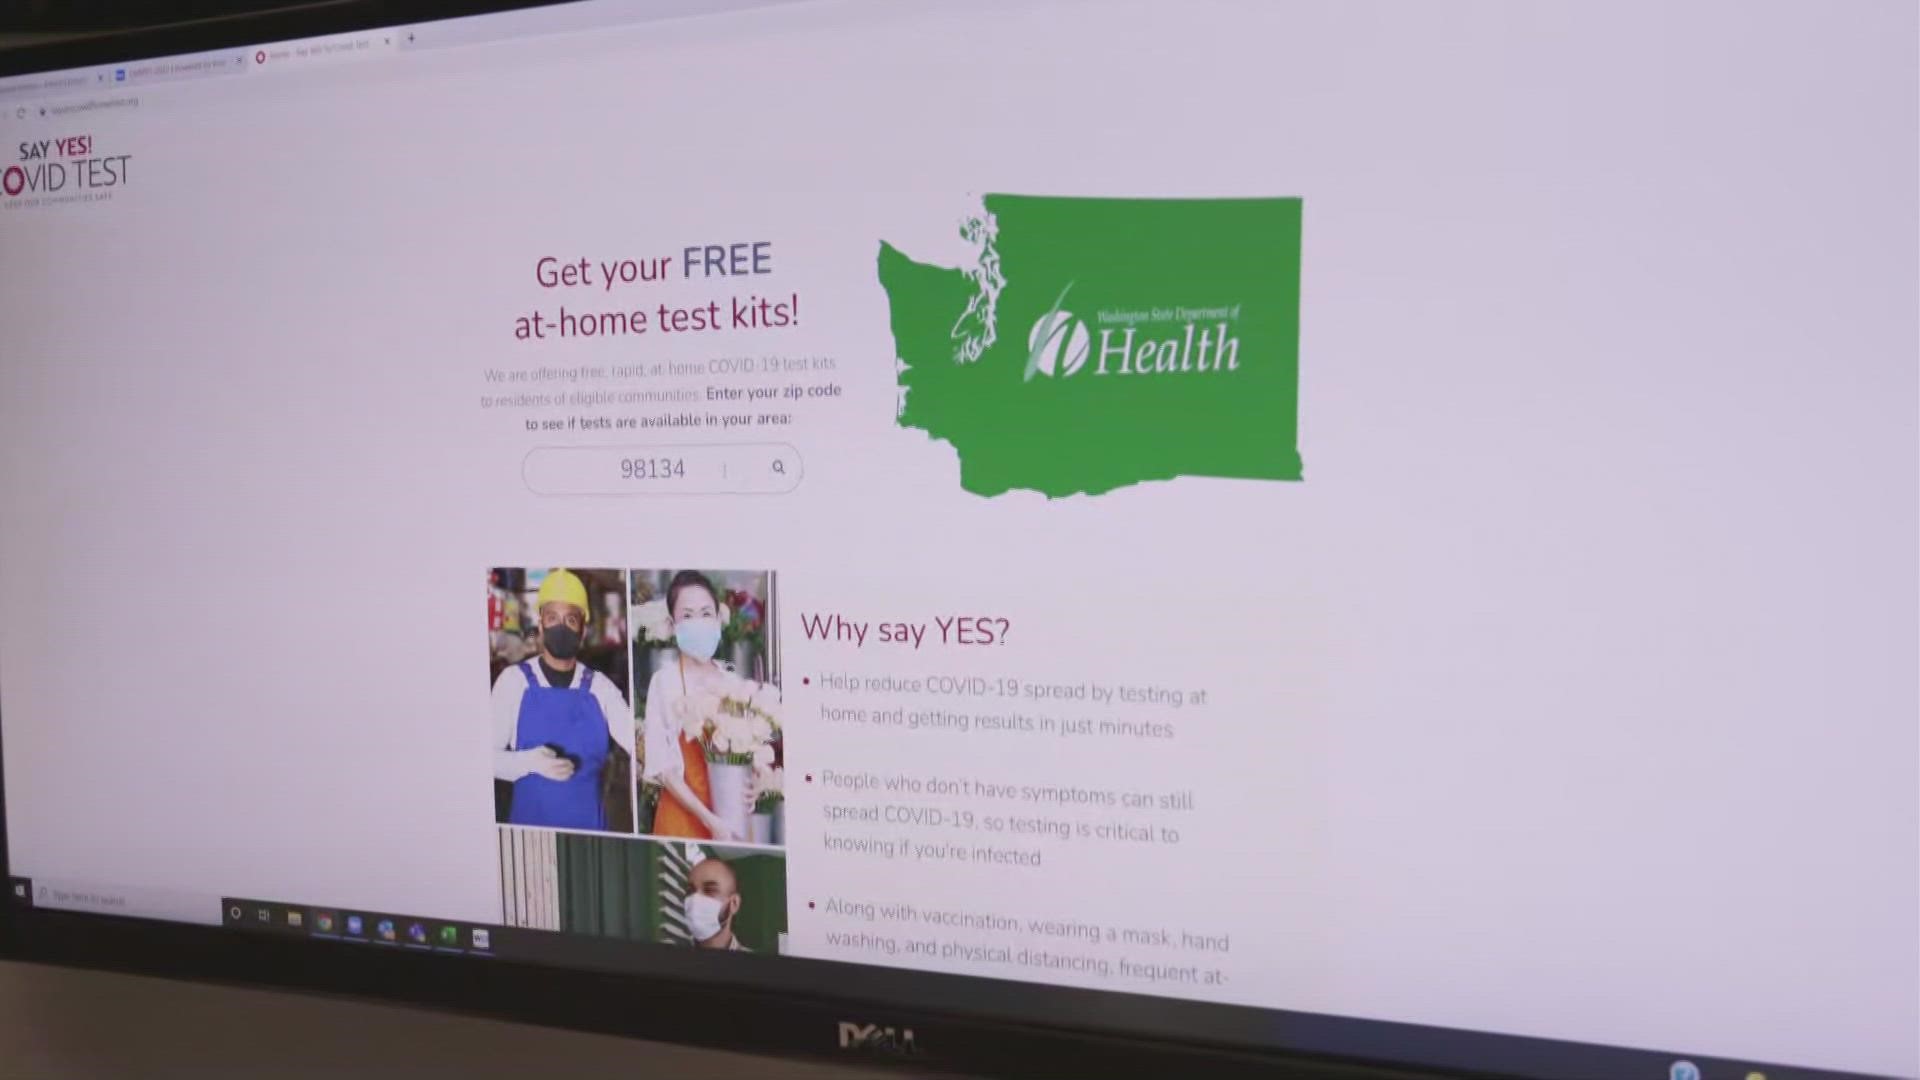 Washington health officials said the website and phone line were open Friday.